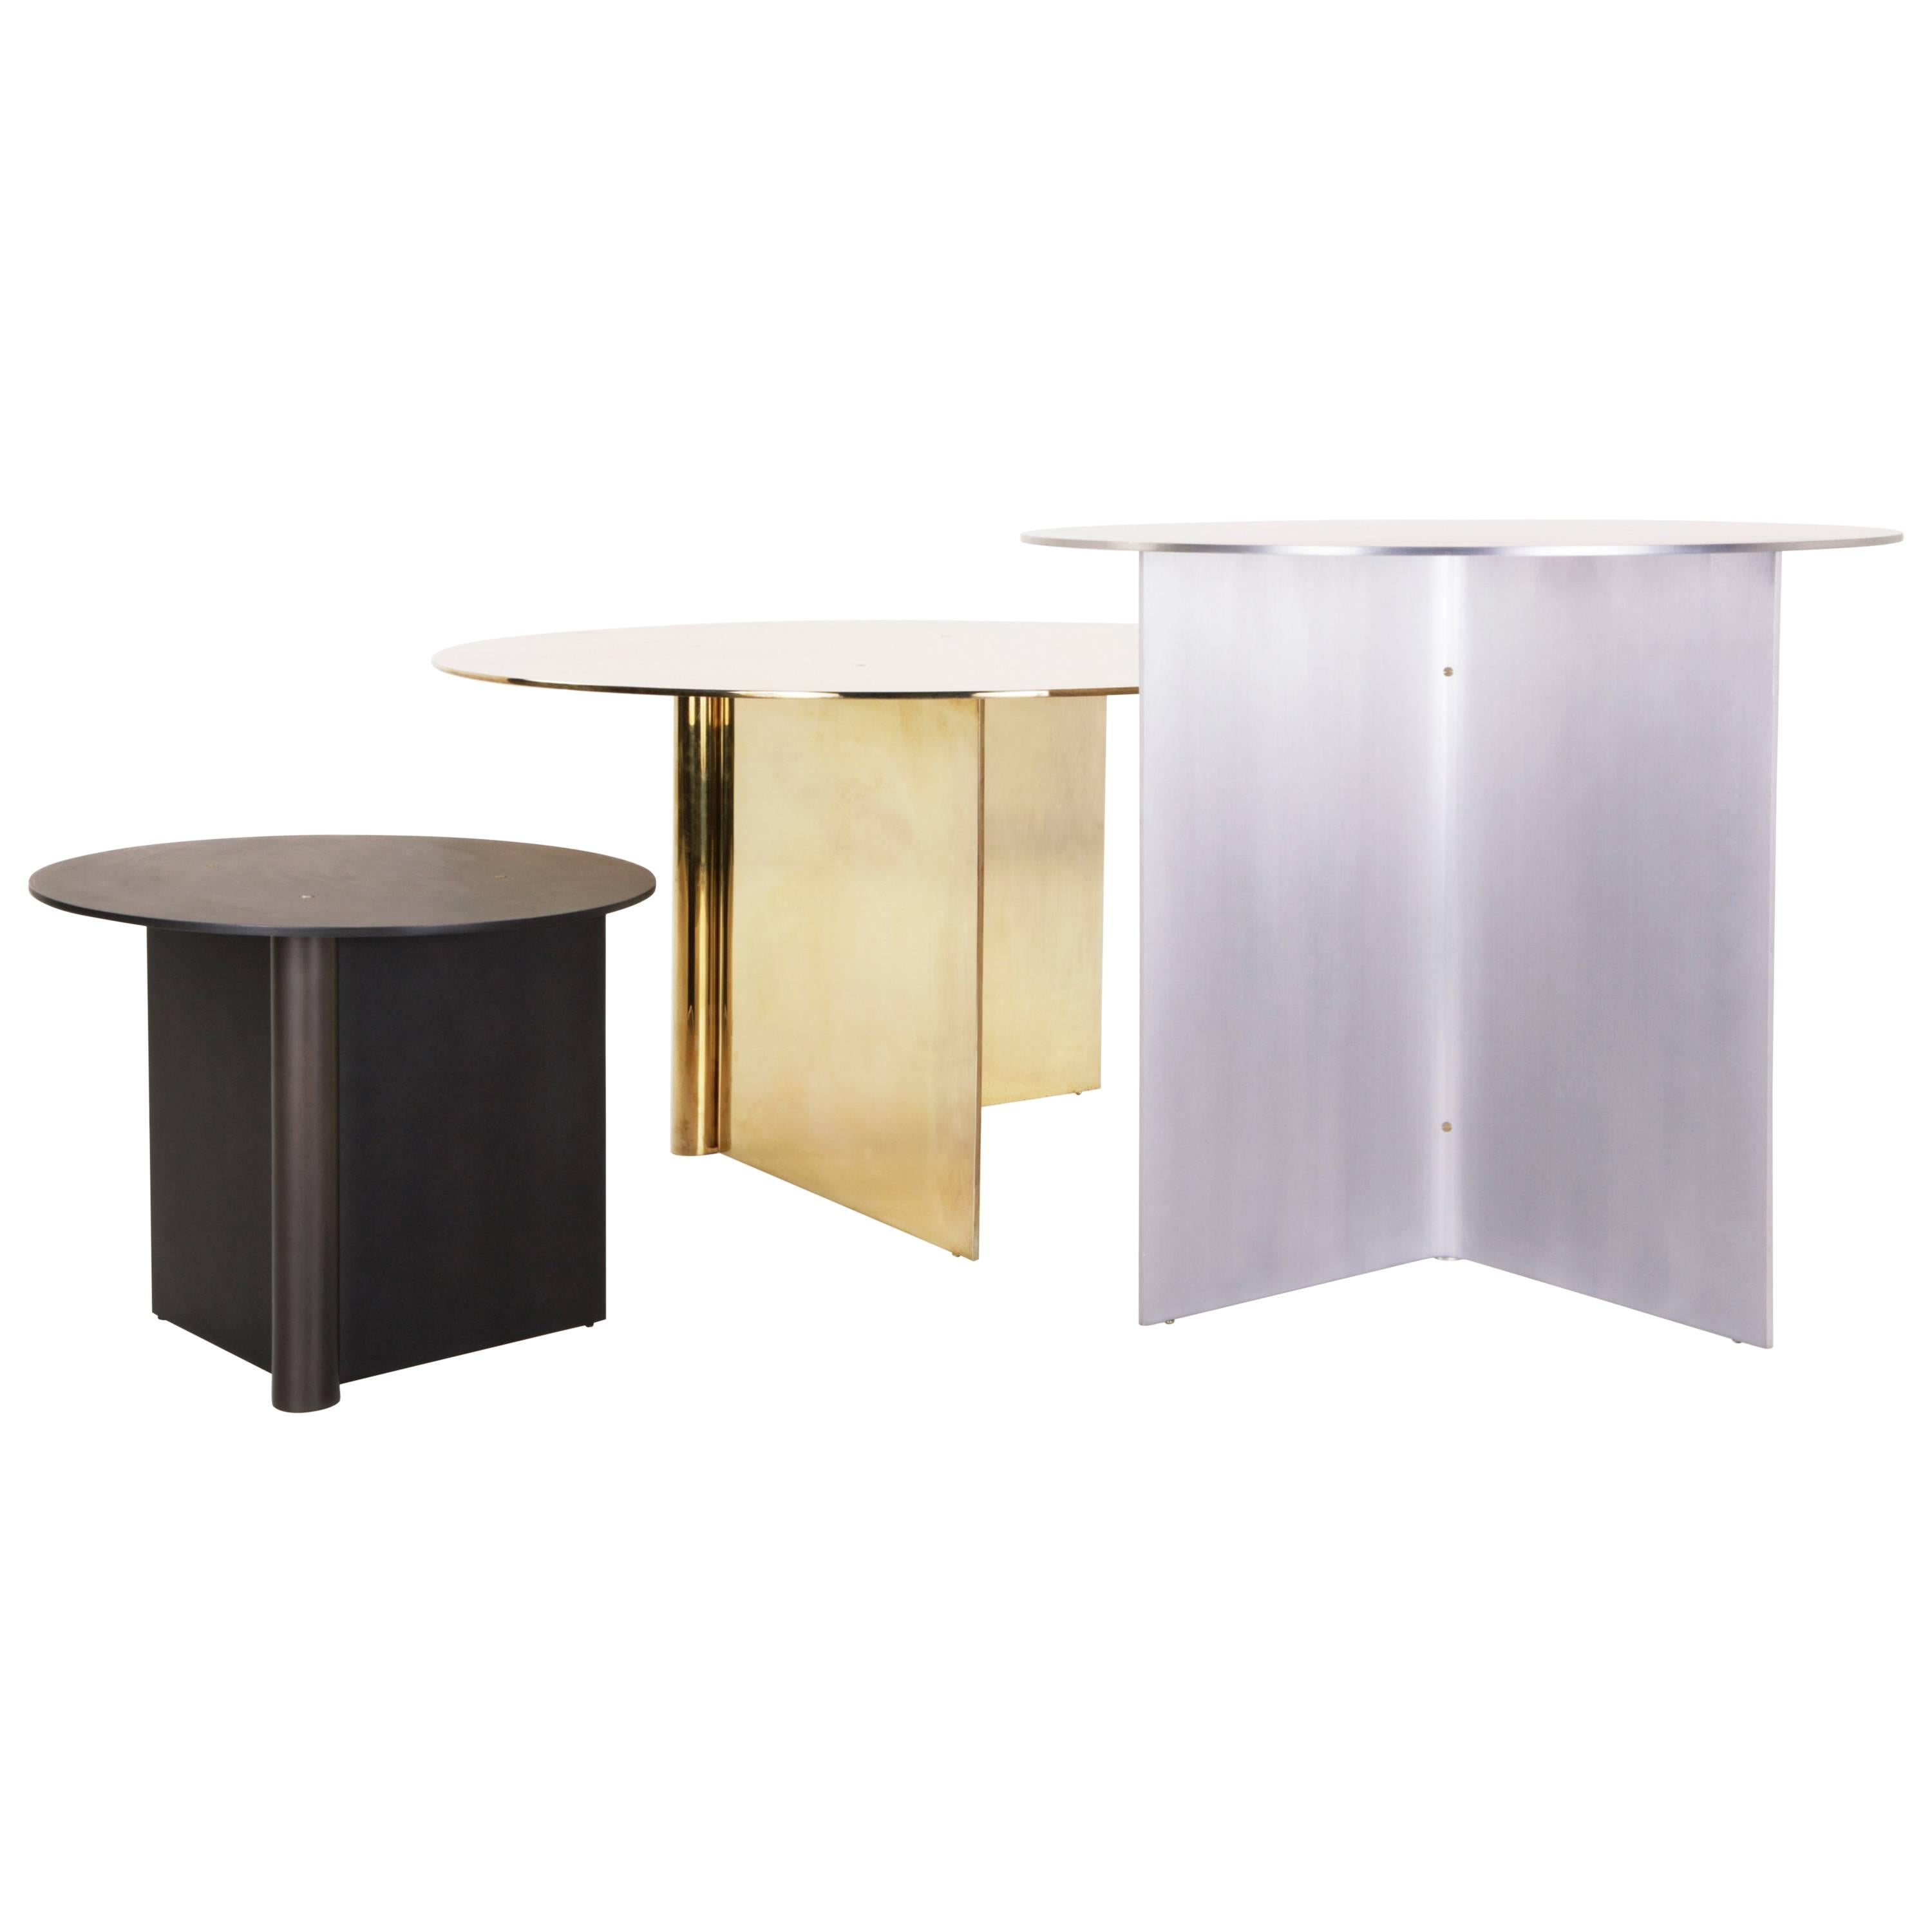 Measures: Large I W 31.5in (80cm) x D 31.5in (80cm) x H 17.5in (44.5cm)

The Os table is made of aluminium with standard finishes in satin brass, polished brass, copper, blackened or matte brushed aluminium. Each table comes with brass screws and